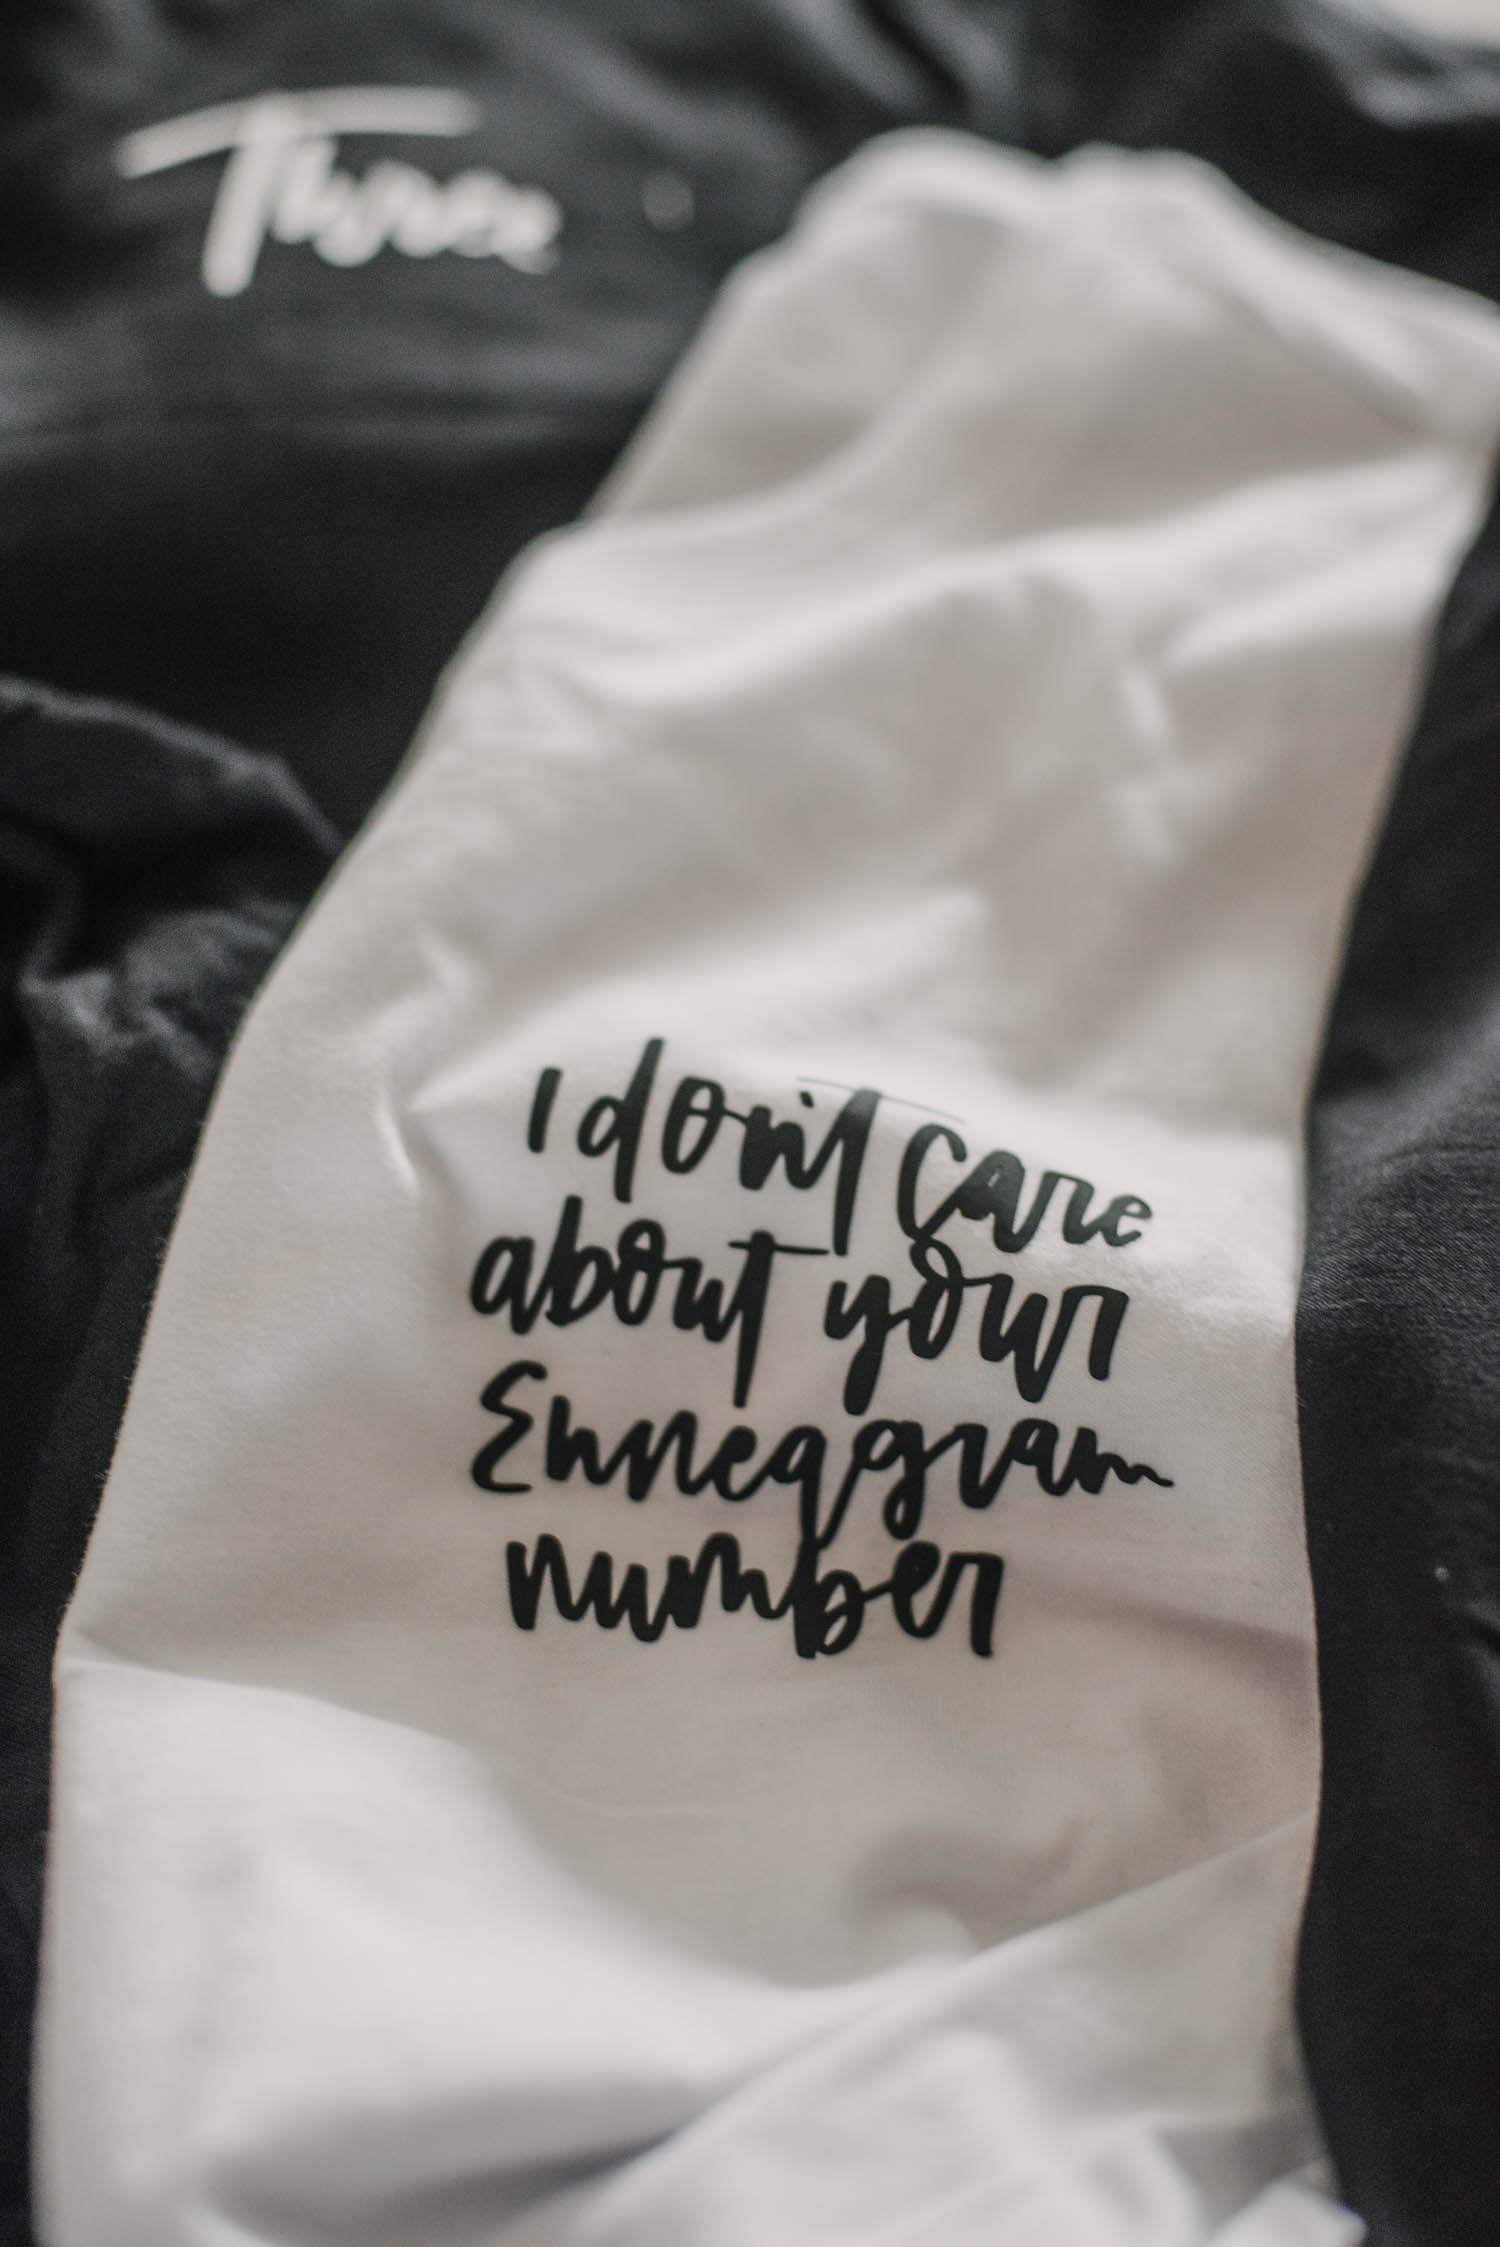 DIY Enneagram shirts with hand lettered designs using the Cricut EasyPress